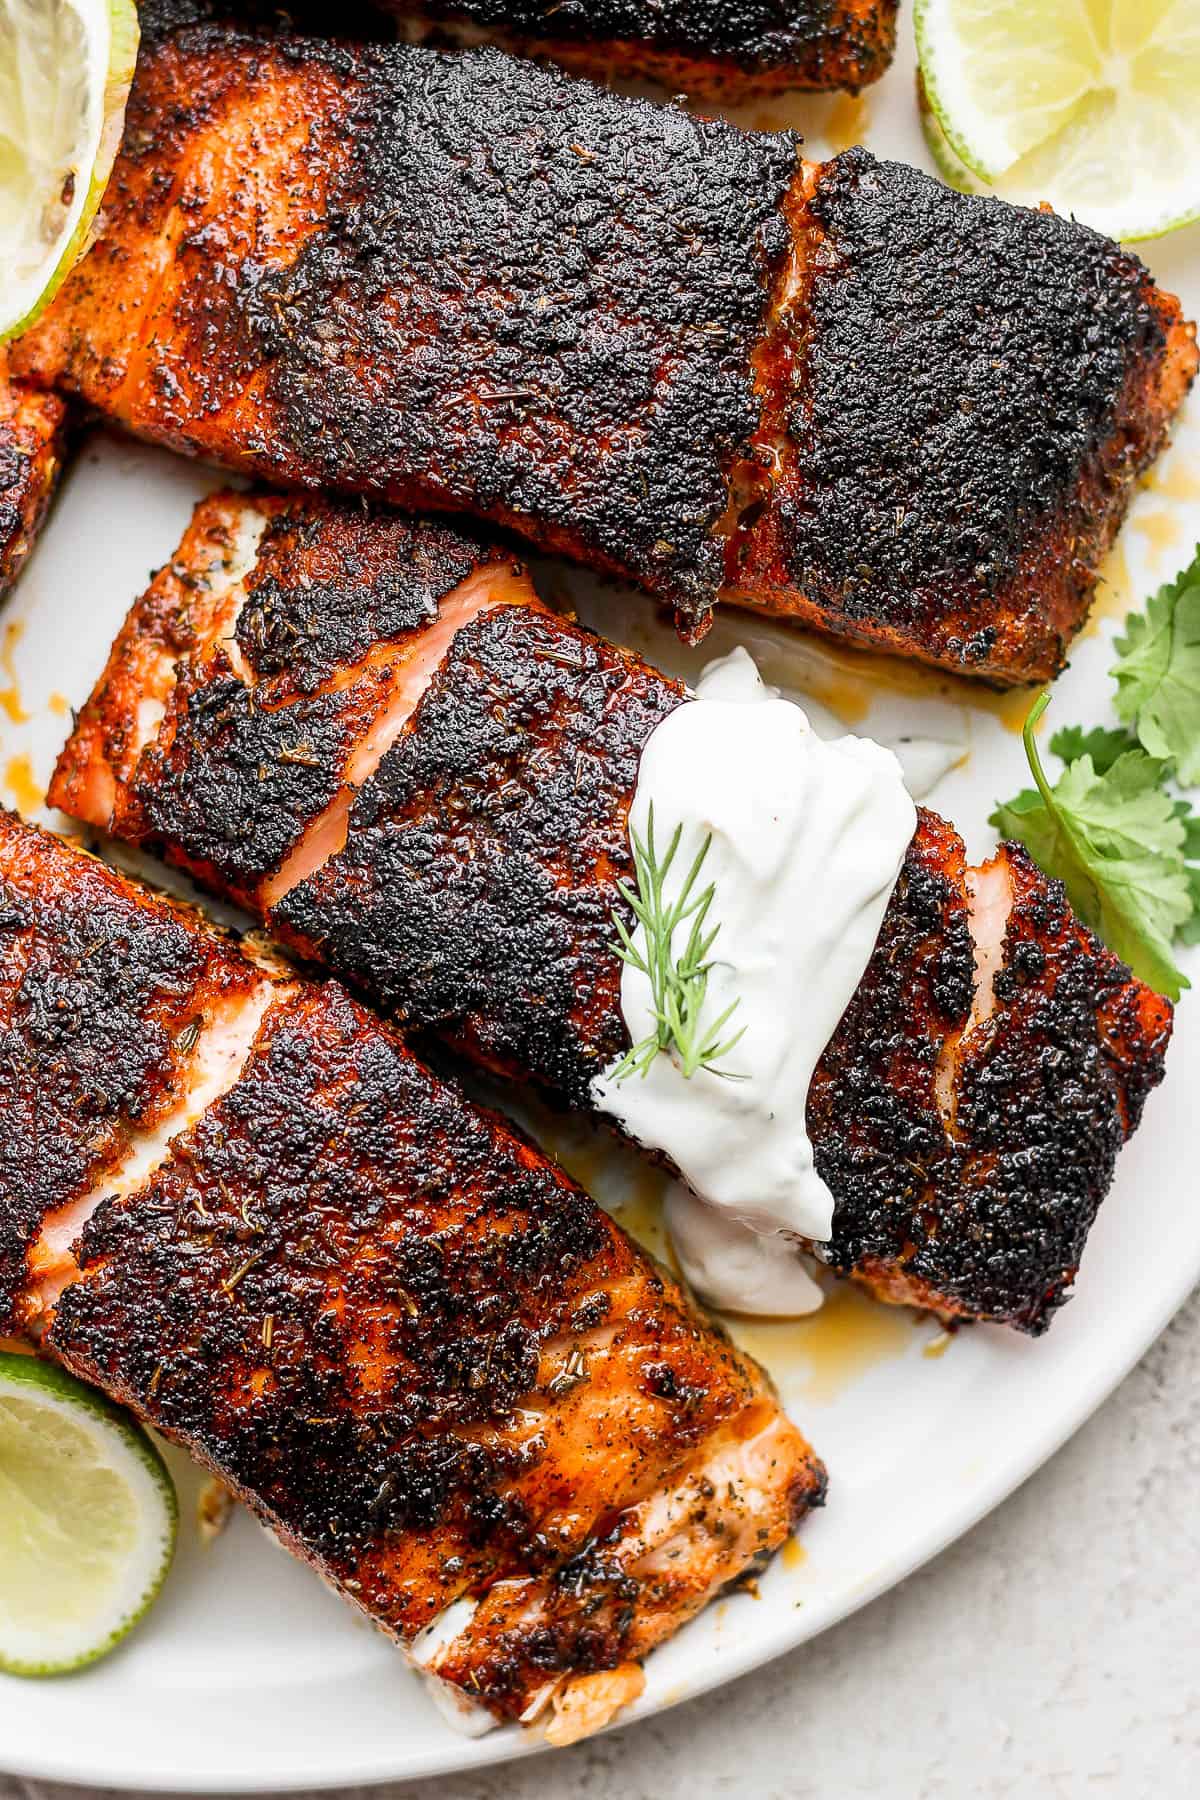 Blackened salmon fillets on a plate with a little dill sauce.